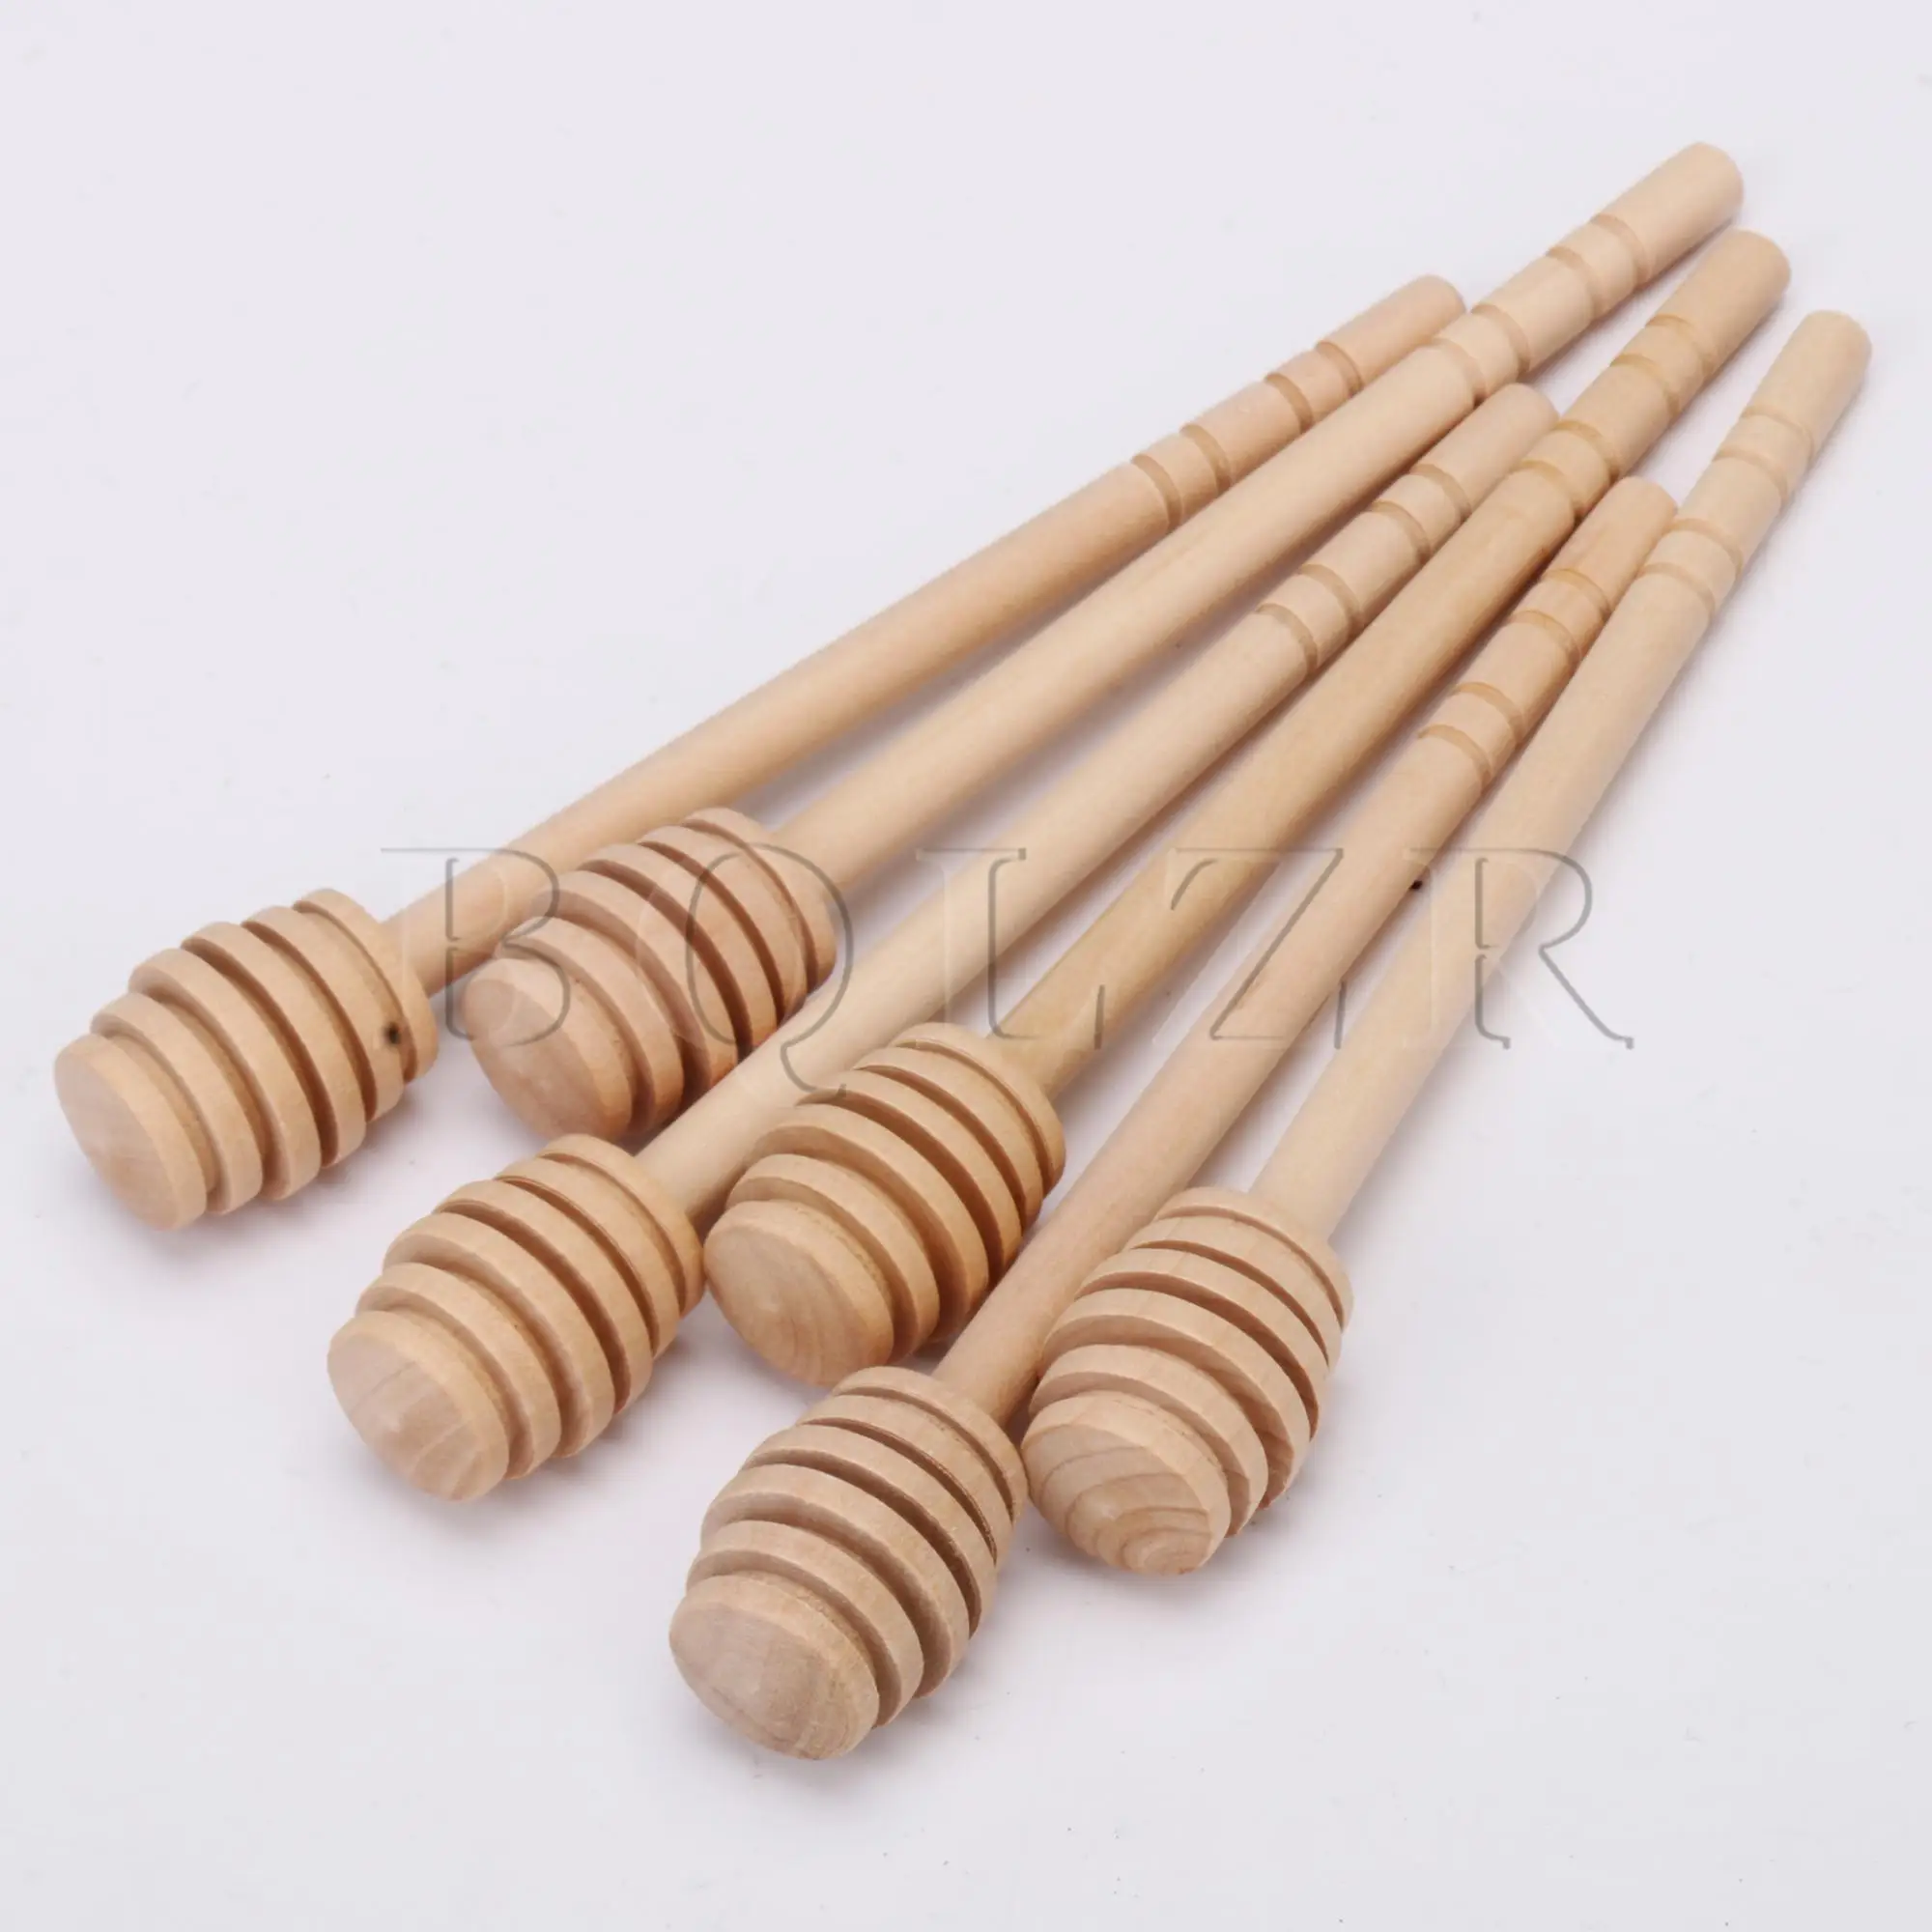 BQLZR 145x20mm Wooden Honey Dipper Wood Stirring Rod Stick Spoon Dip Drizzler for Collecting Syrup Molasses Pack of 20 | Инструменты